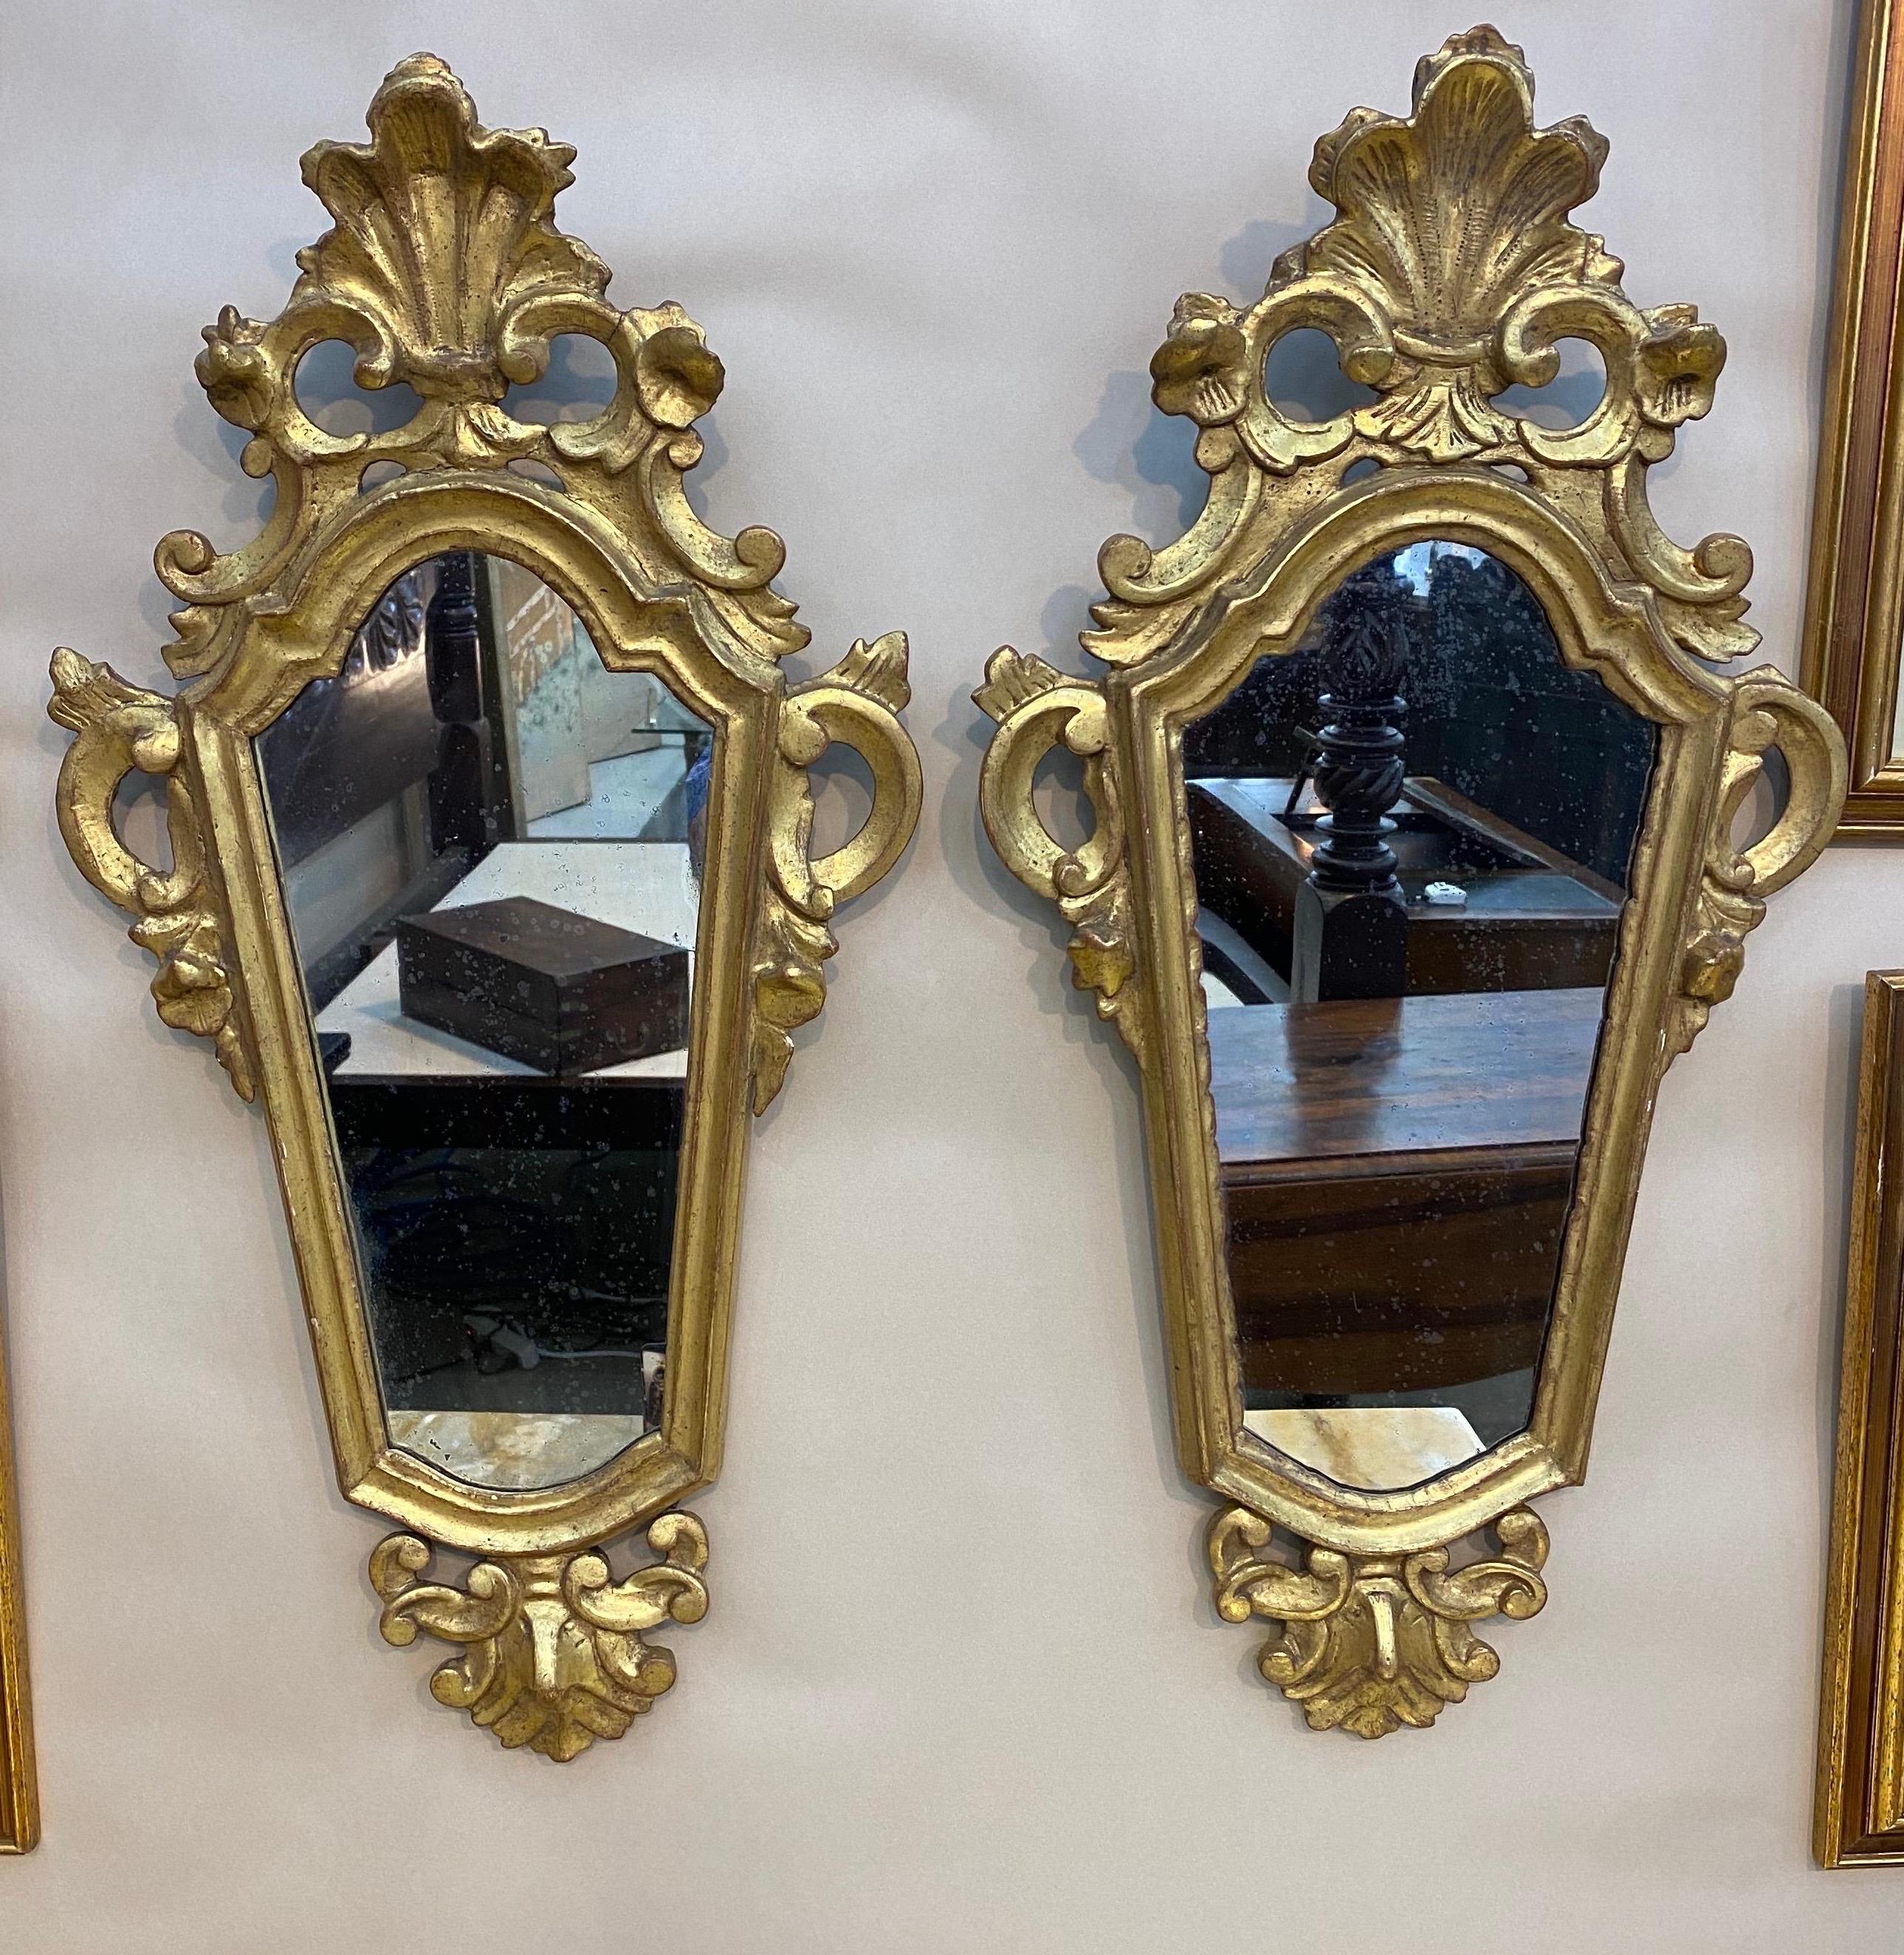 Pair of early 19th century Italian giltwood mirrors.